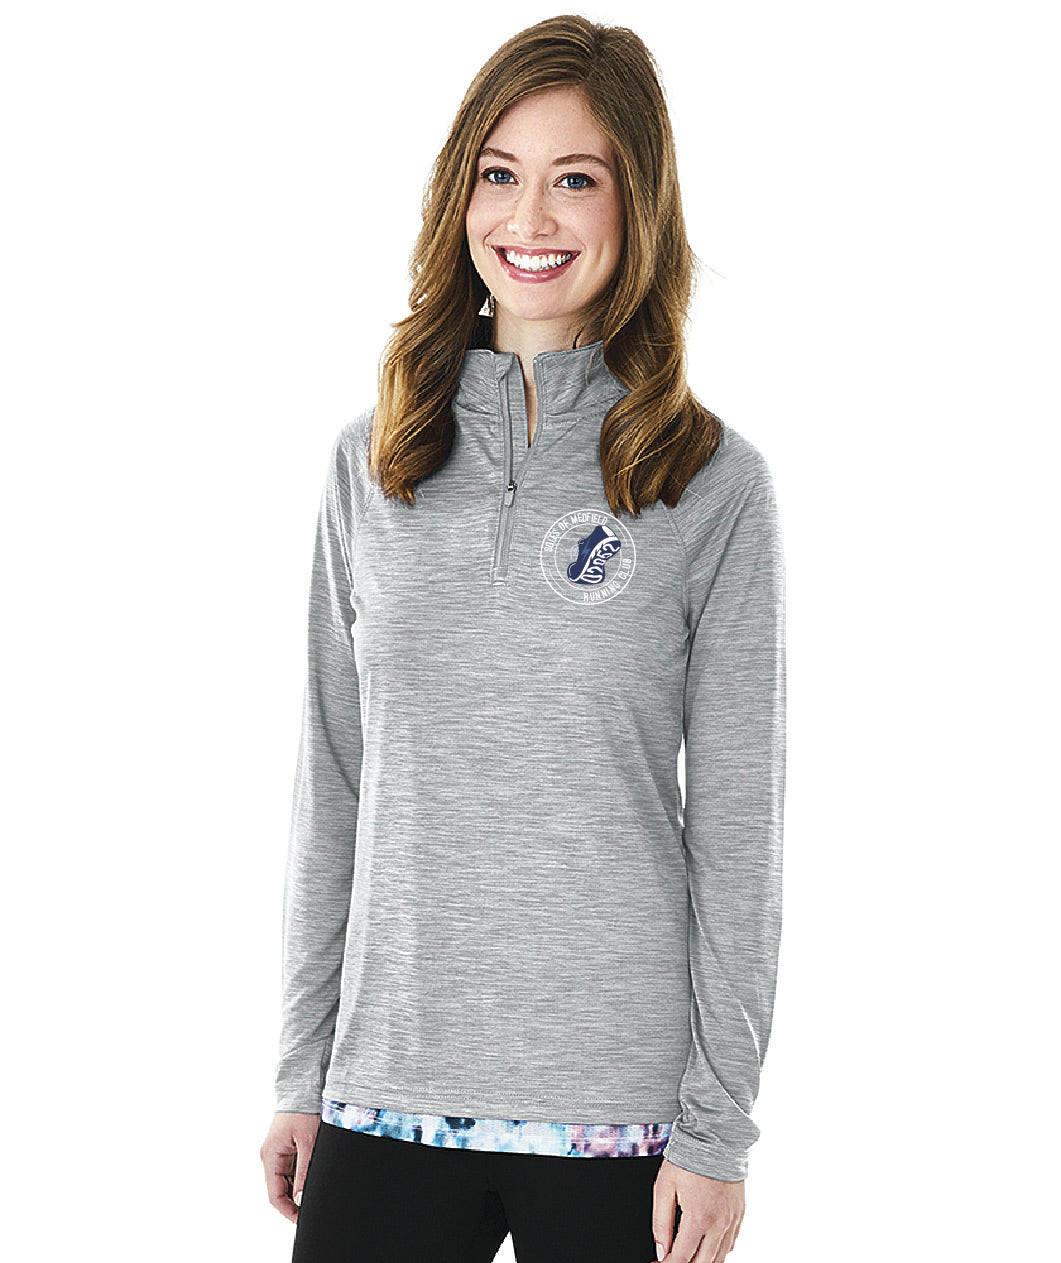 The Soles of Medfield Women's Space Dye Performance Pullover (5763)